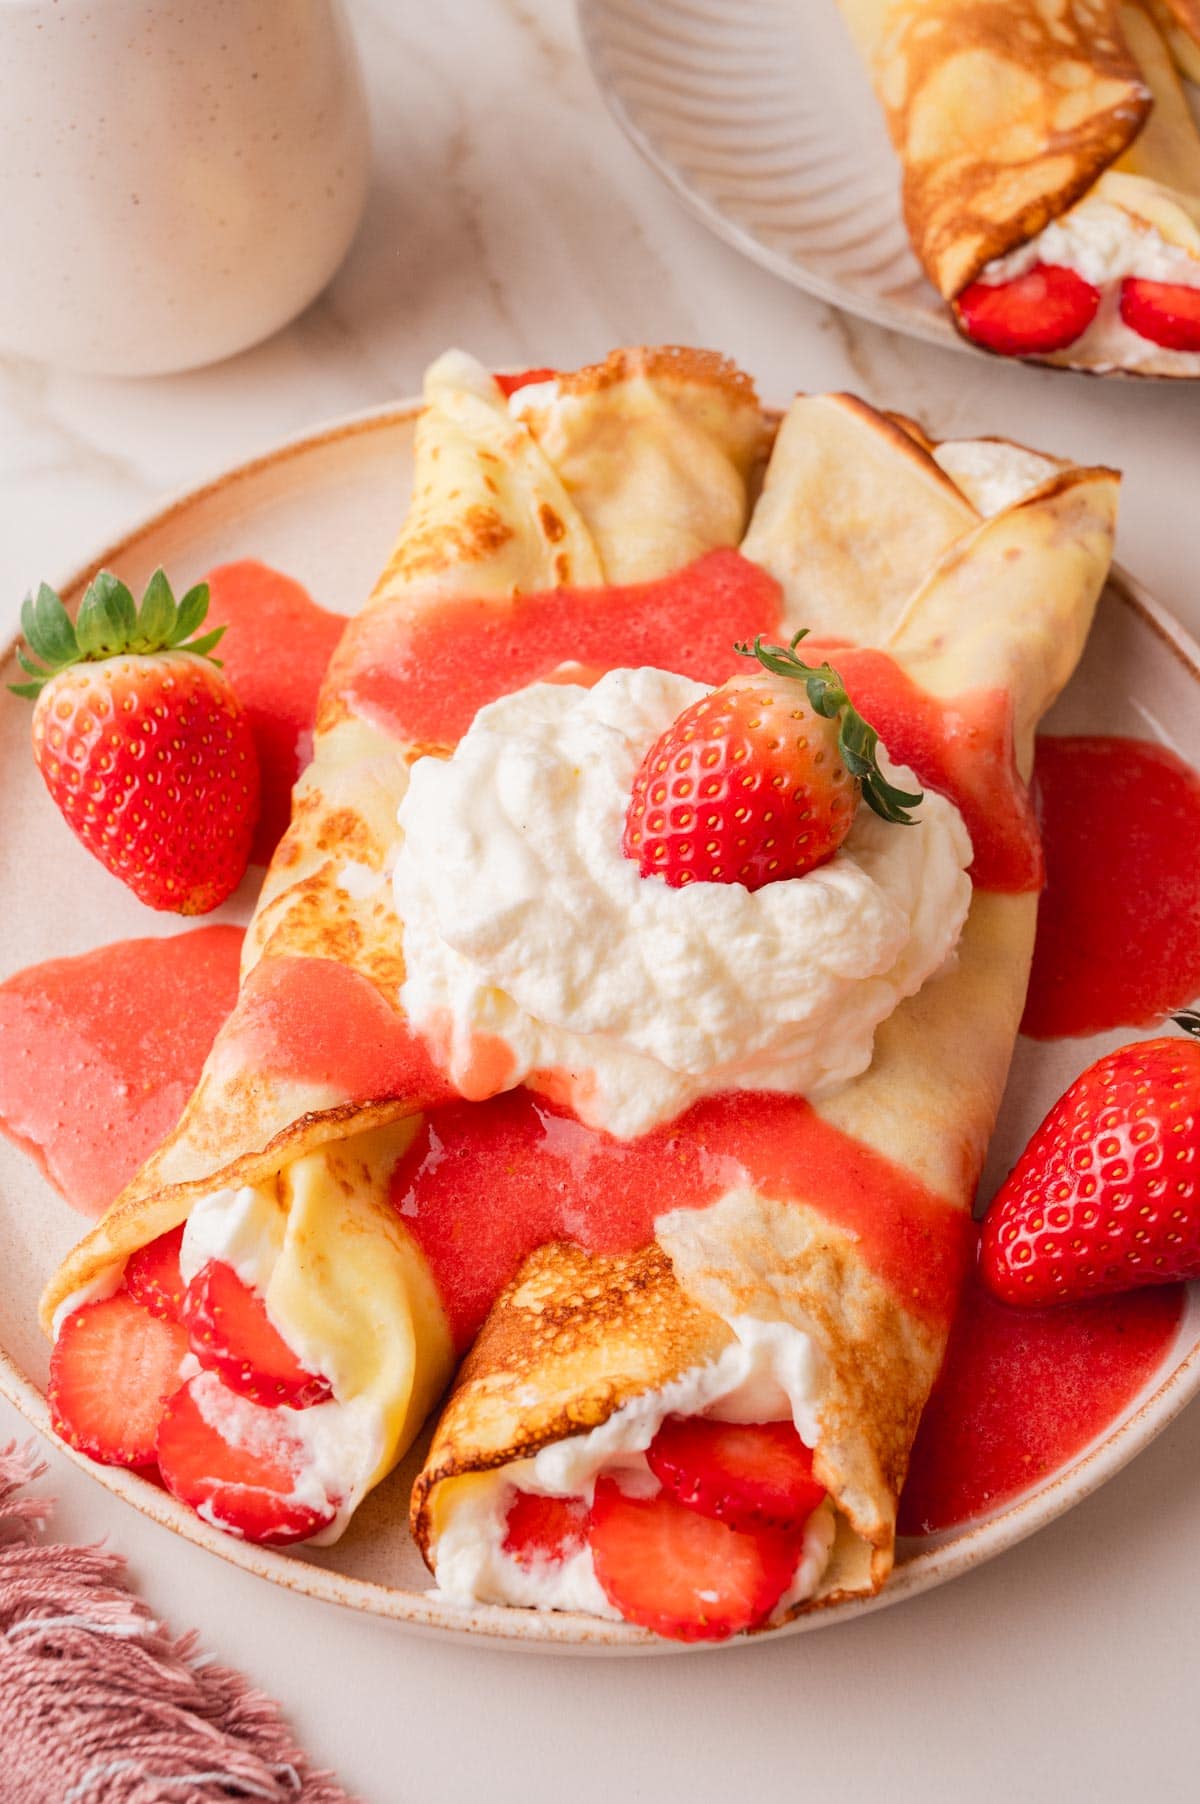 Crepes filled with whipped cream and fresh strawberries served with strawberry sauce on a beige plate.